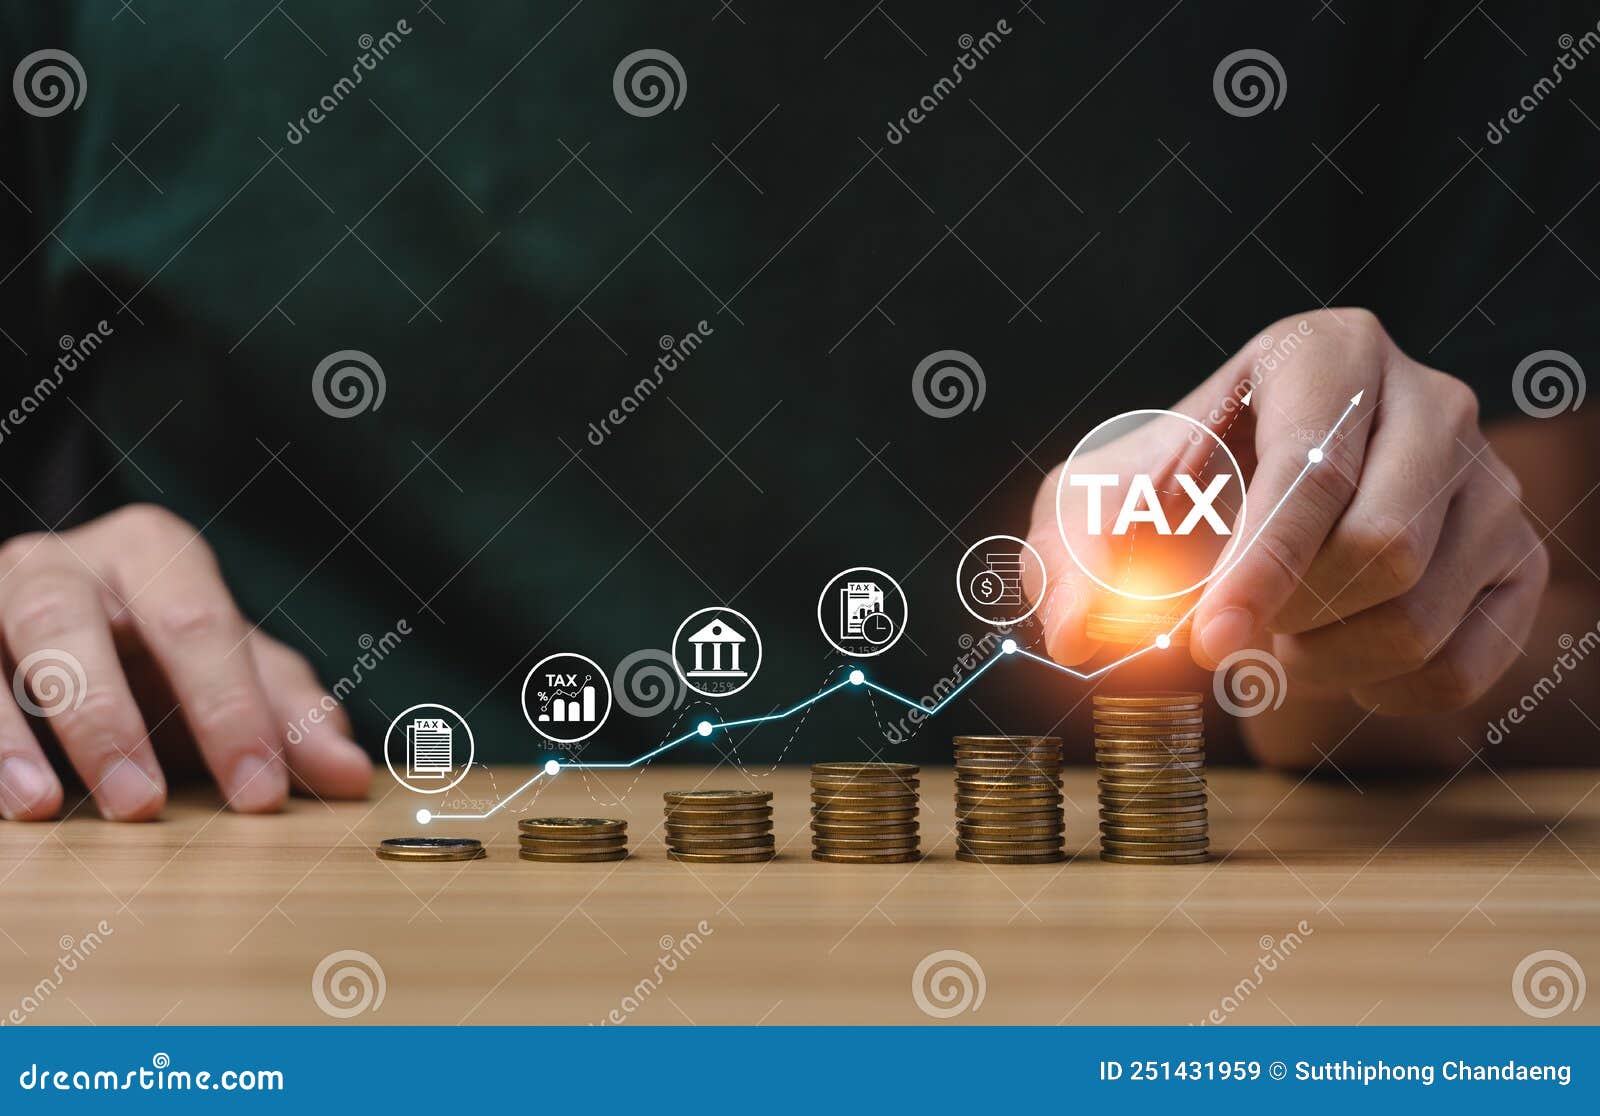 tax-deduction-planning-concept-expenses-account-vat-income-tax-and